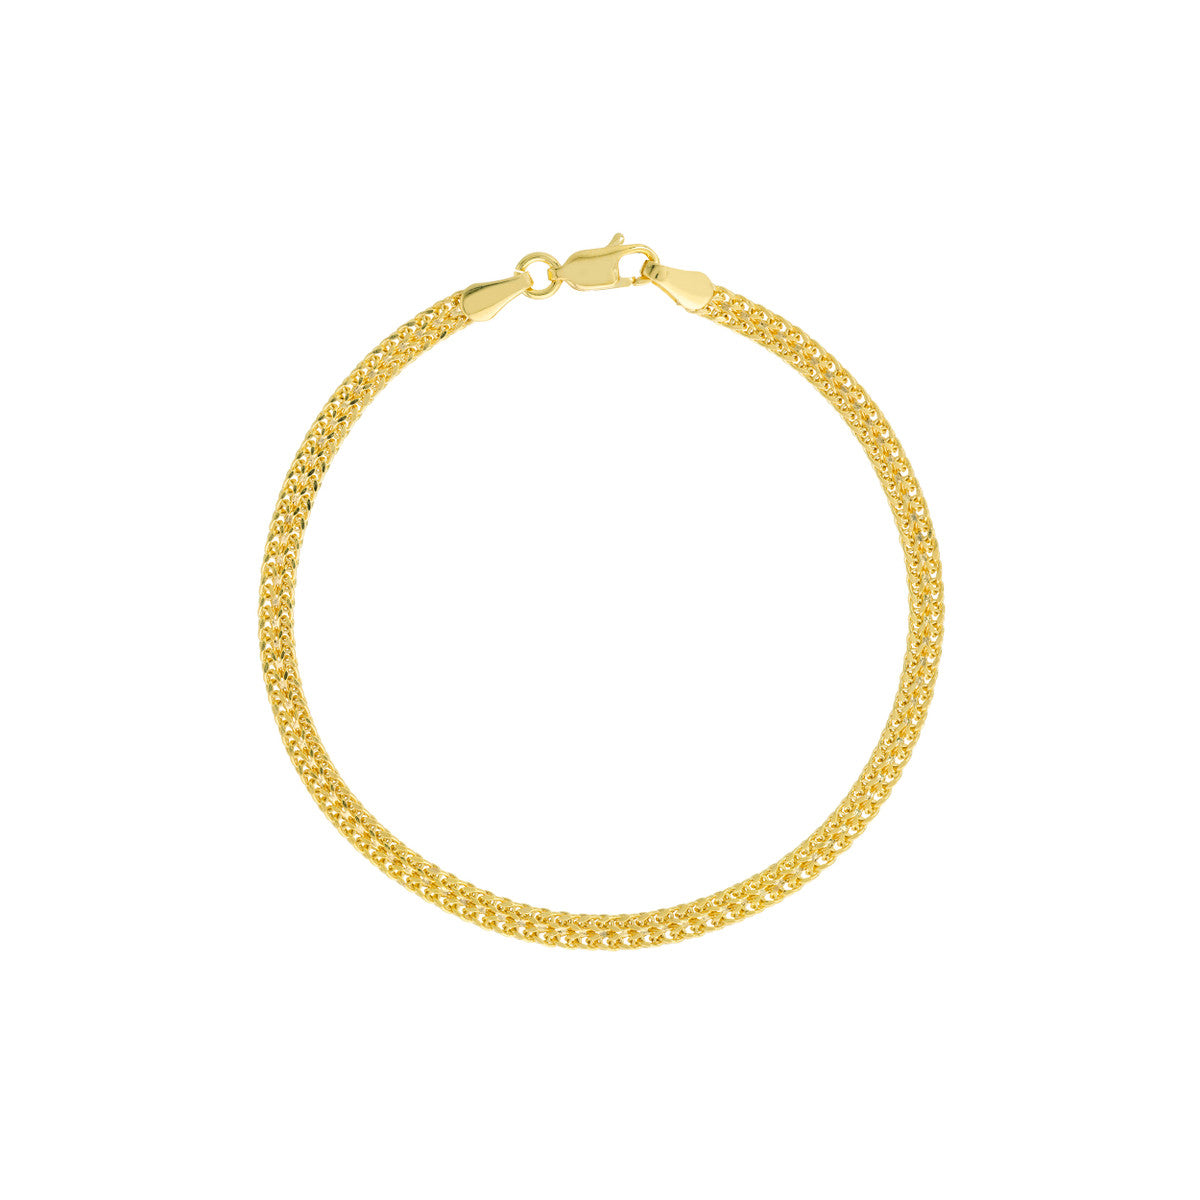 Gold Hollow Wheat Chain Bracelet in 14k Yellow Gold